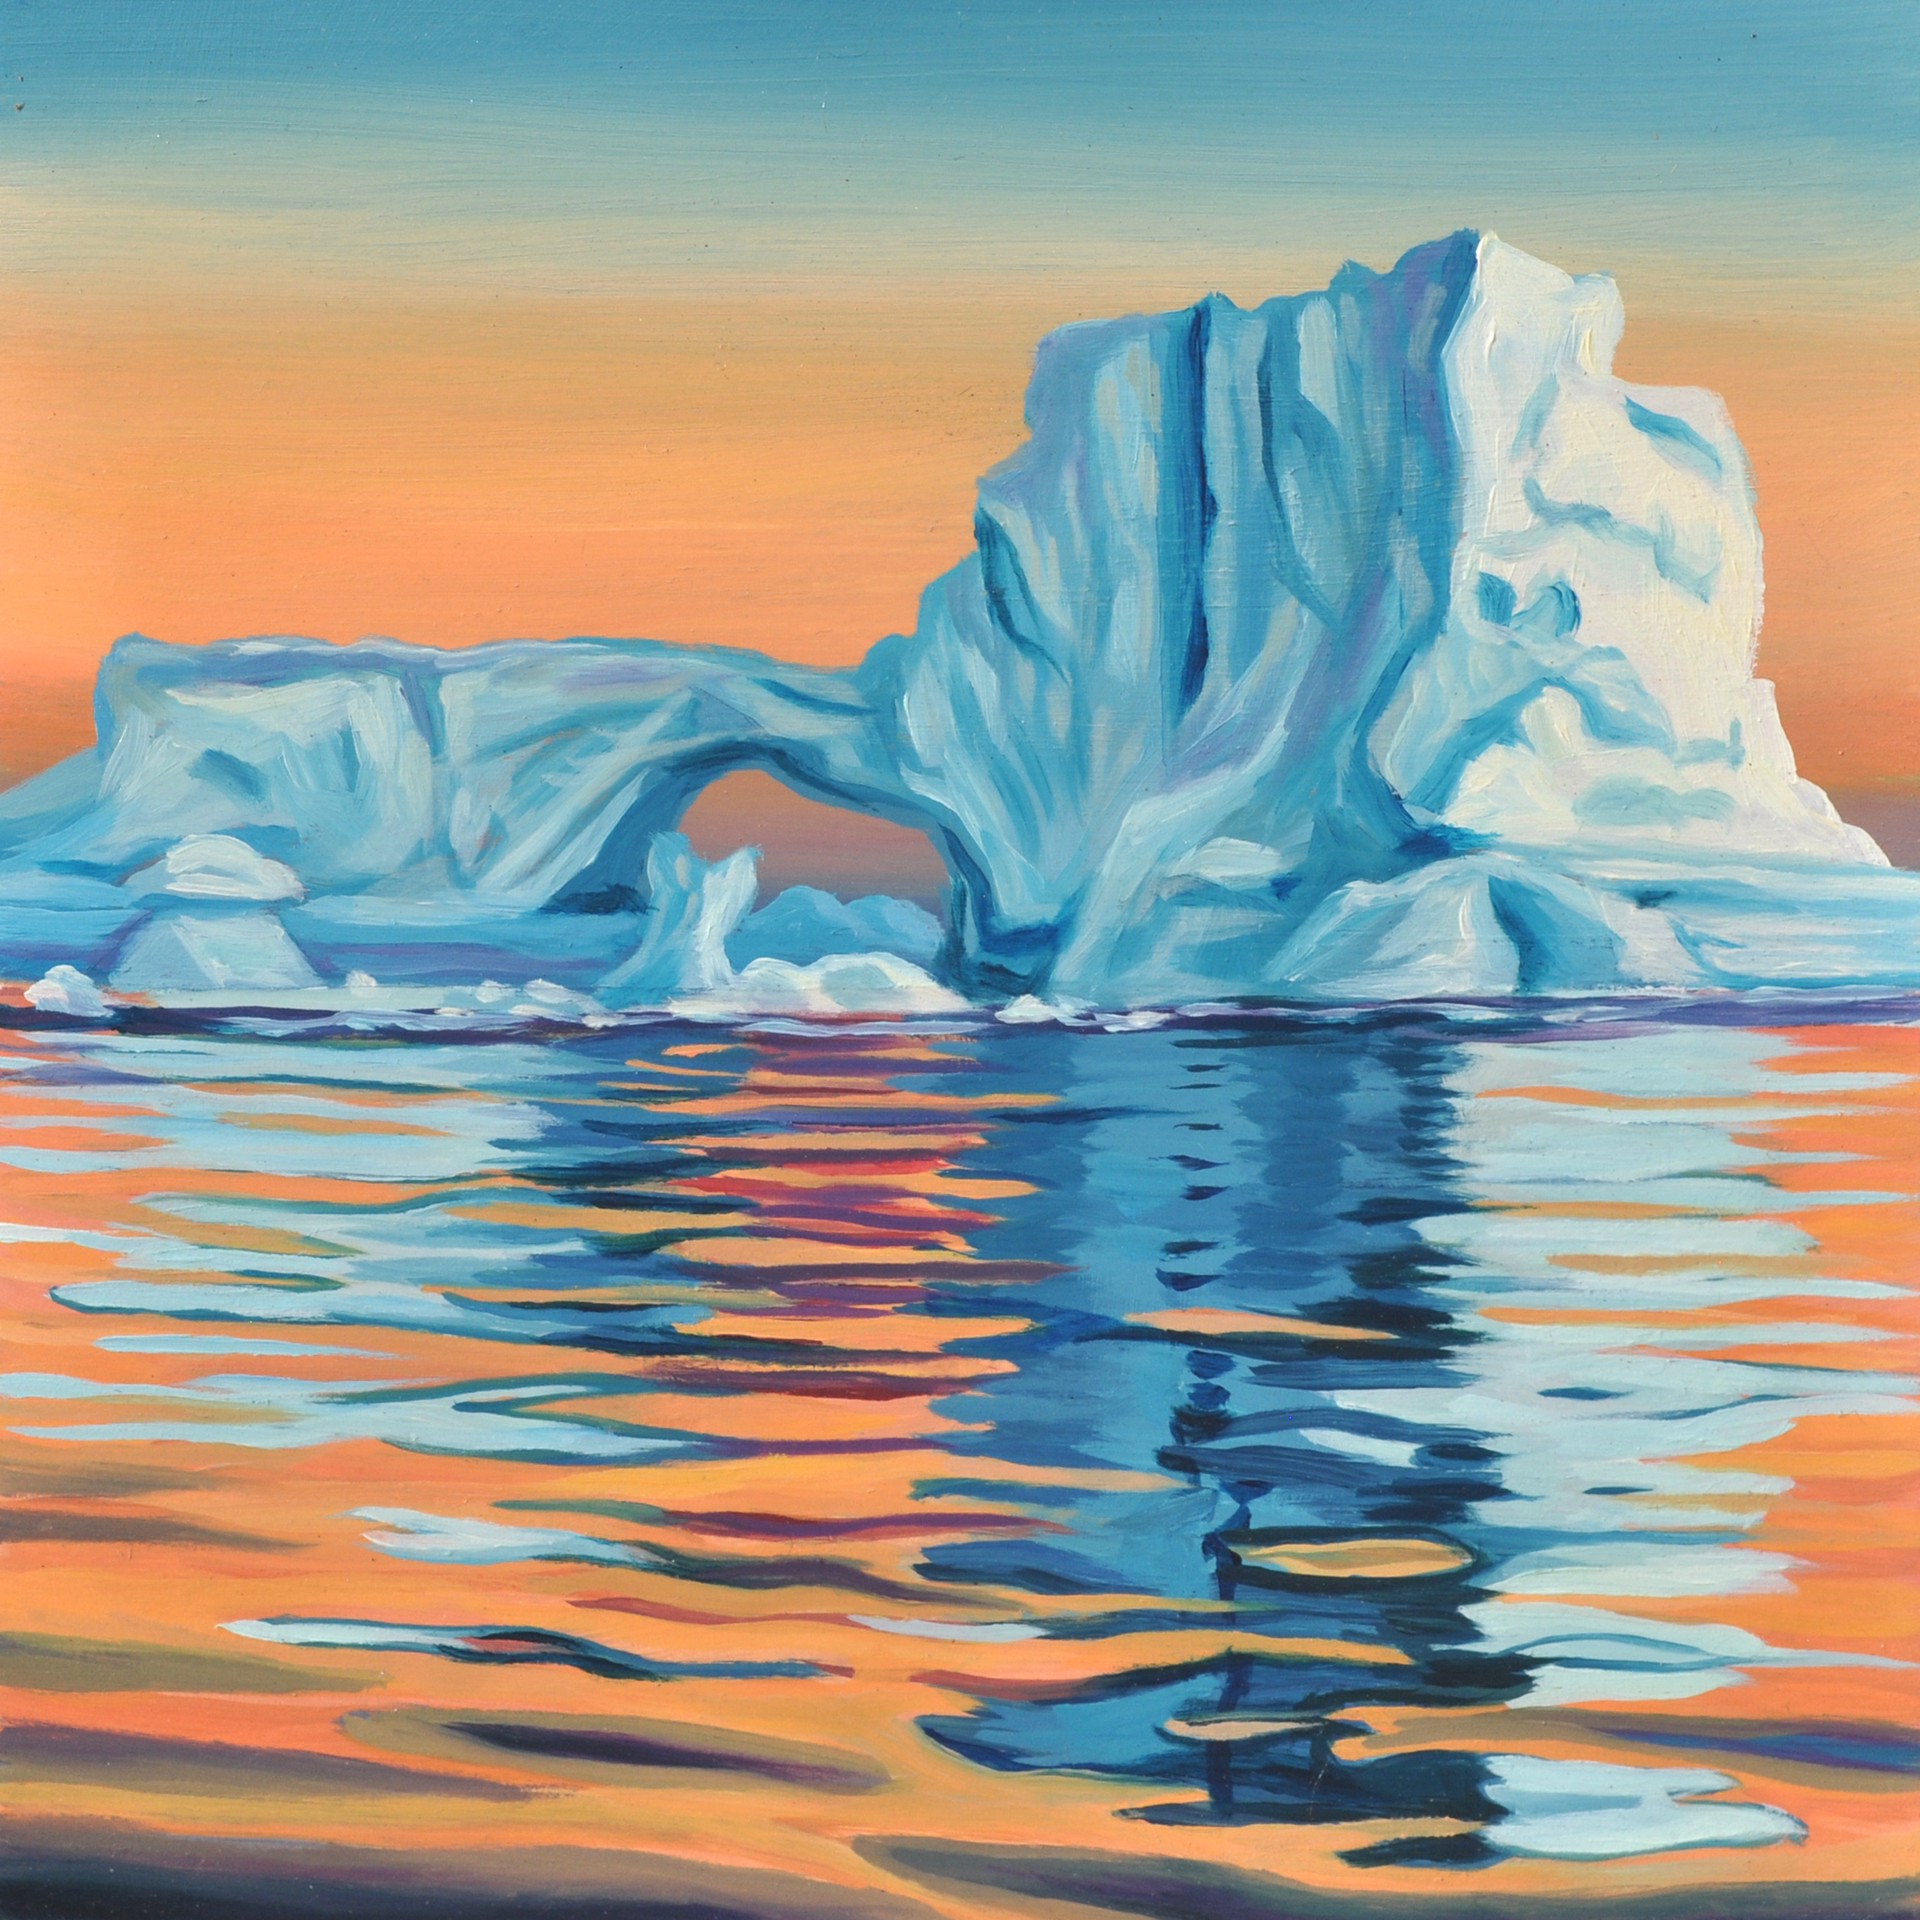 Iceberg in a Sunset by Robin Hextrum